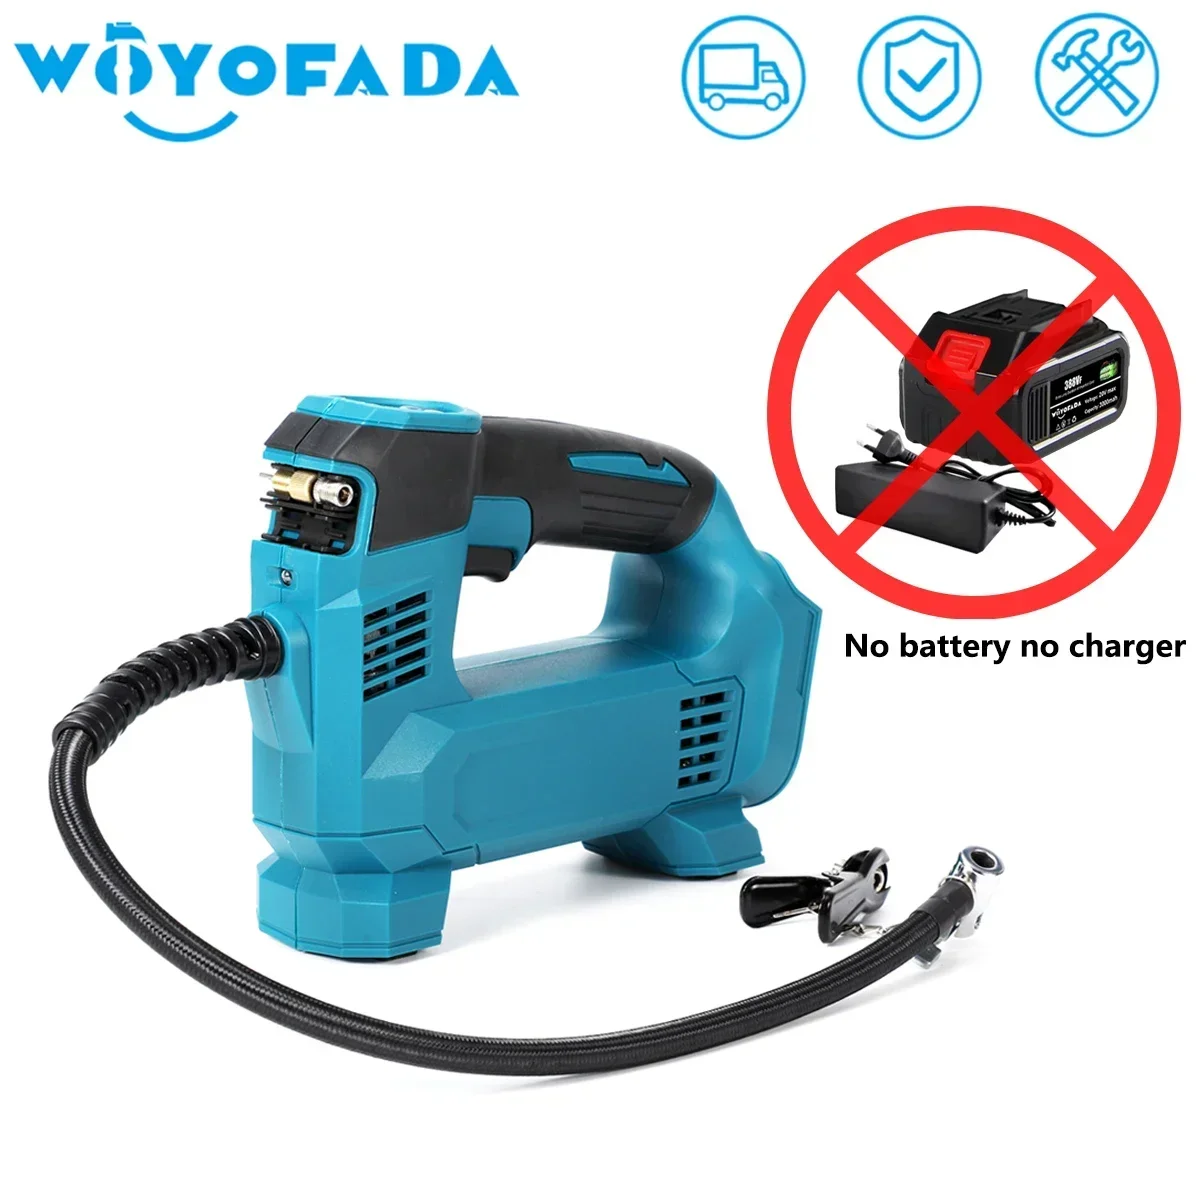 WOYOFADA Cordless Portable Electric Air Pump Car Tire Inflator Air Compressor For Car Bicycle Tires Balls For Makita 18V Battery bezior xf001 retro electric bike 20 4 0 inch fat tires 1000w motor 12 5ah 48v battery 28mph max speed 265lbs max load shimano 7 speed dual mechanical disc brakes front